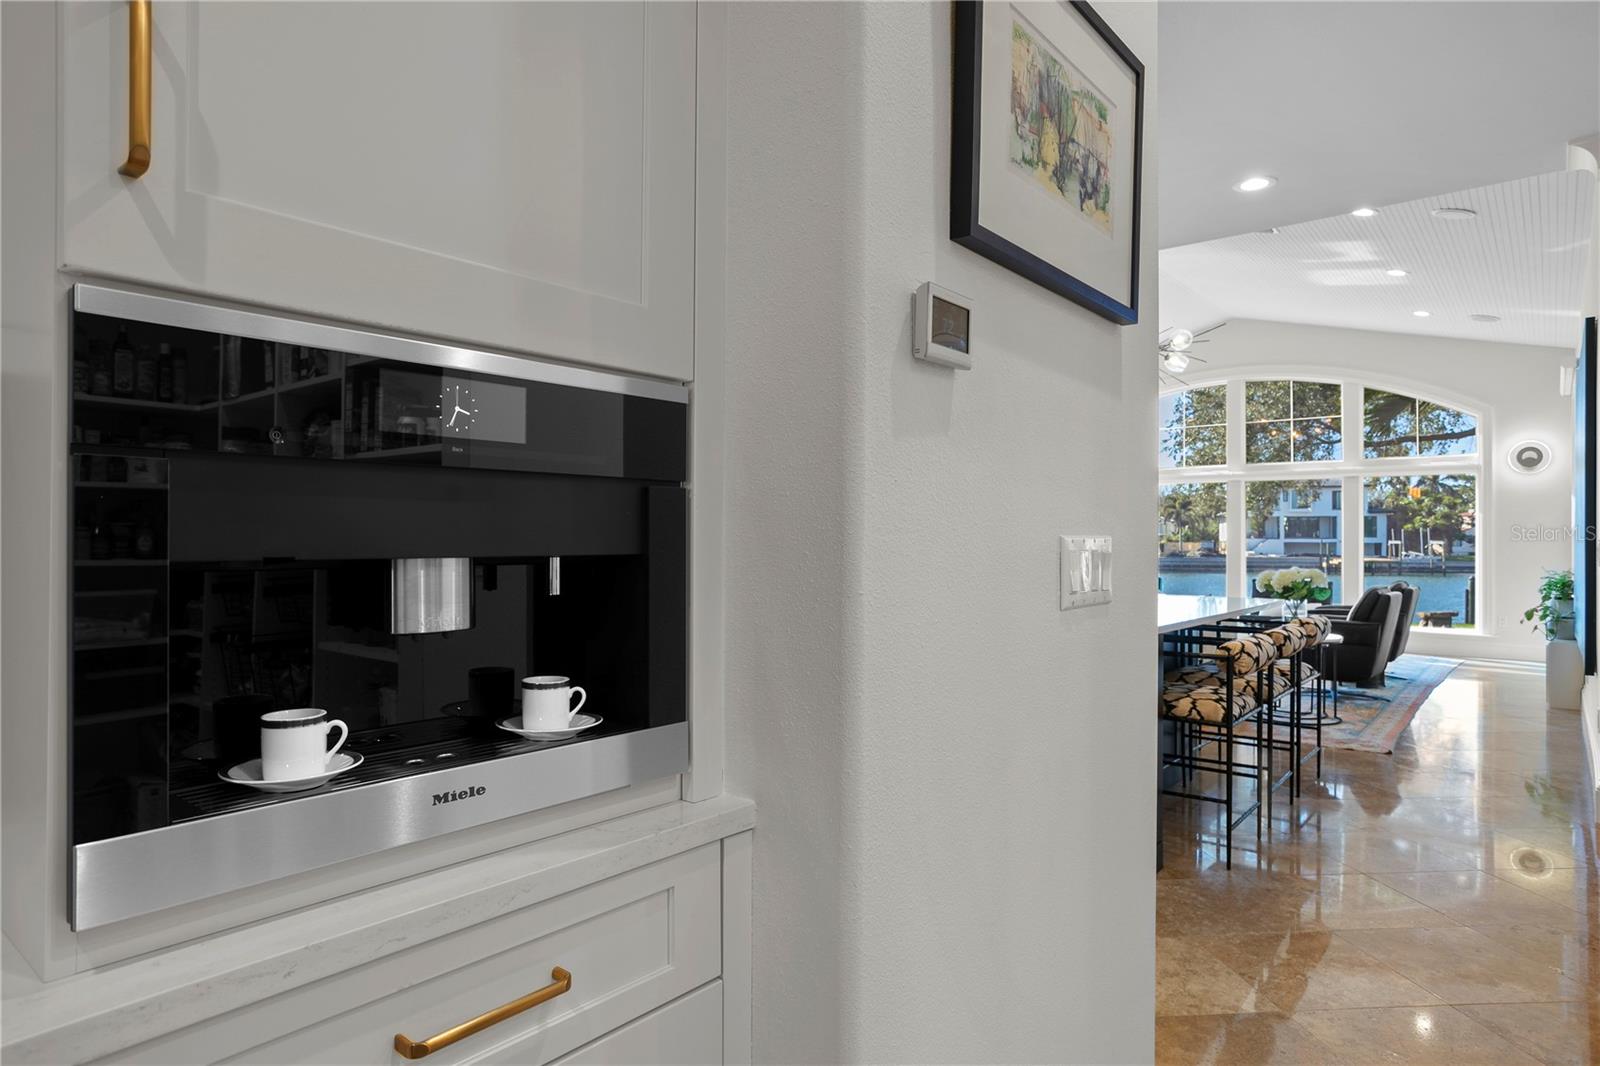 The butler pantry has a dry bar, Miele coffee maker and access to the oversized walk-in updated pantry.